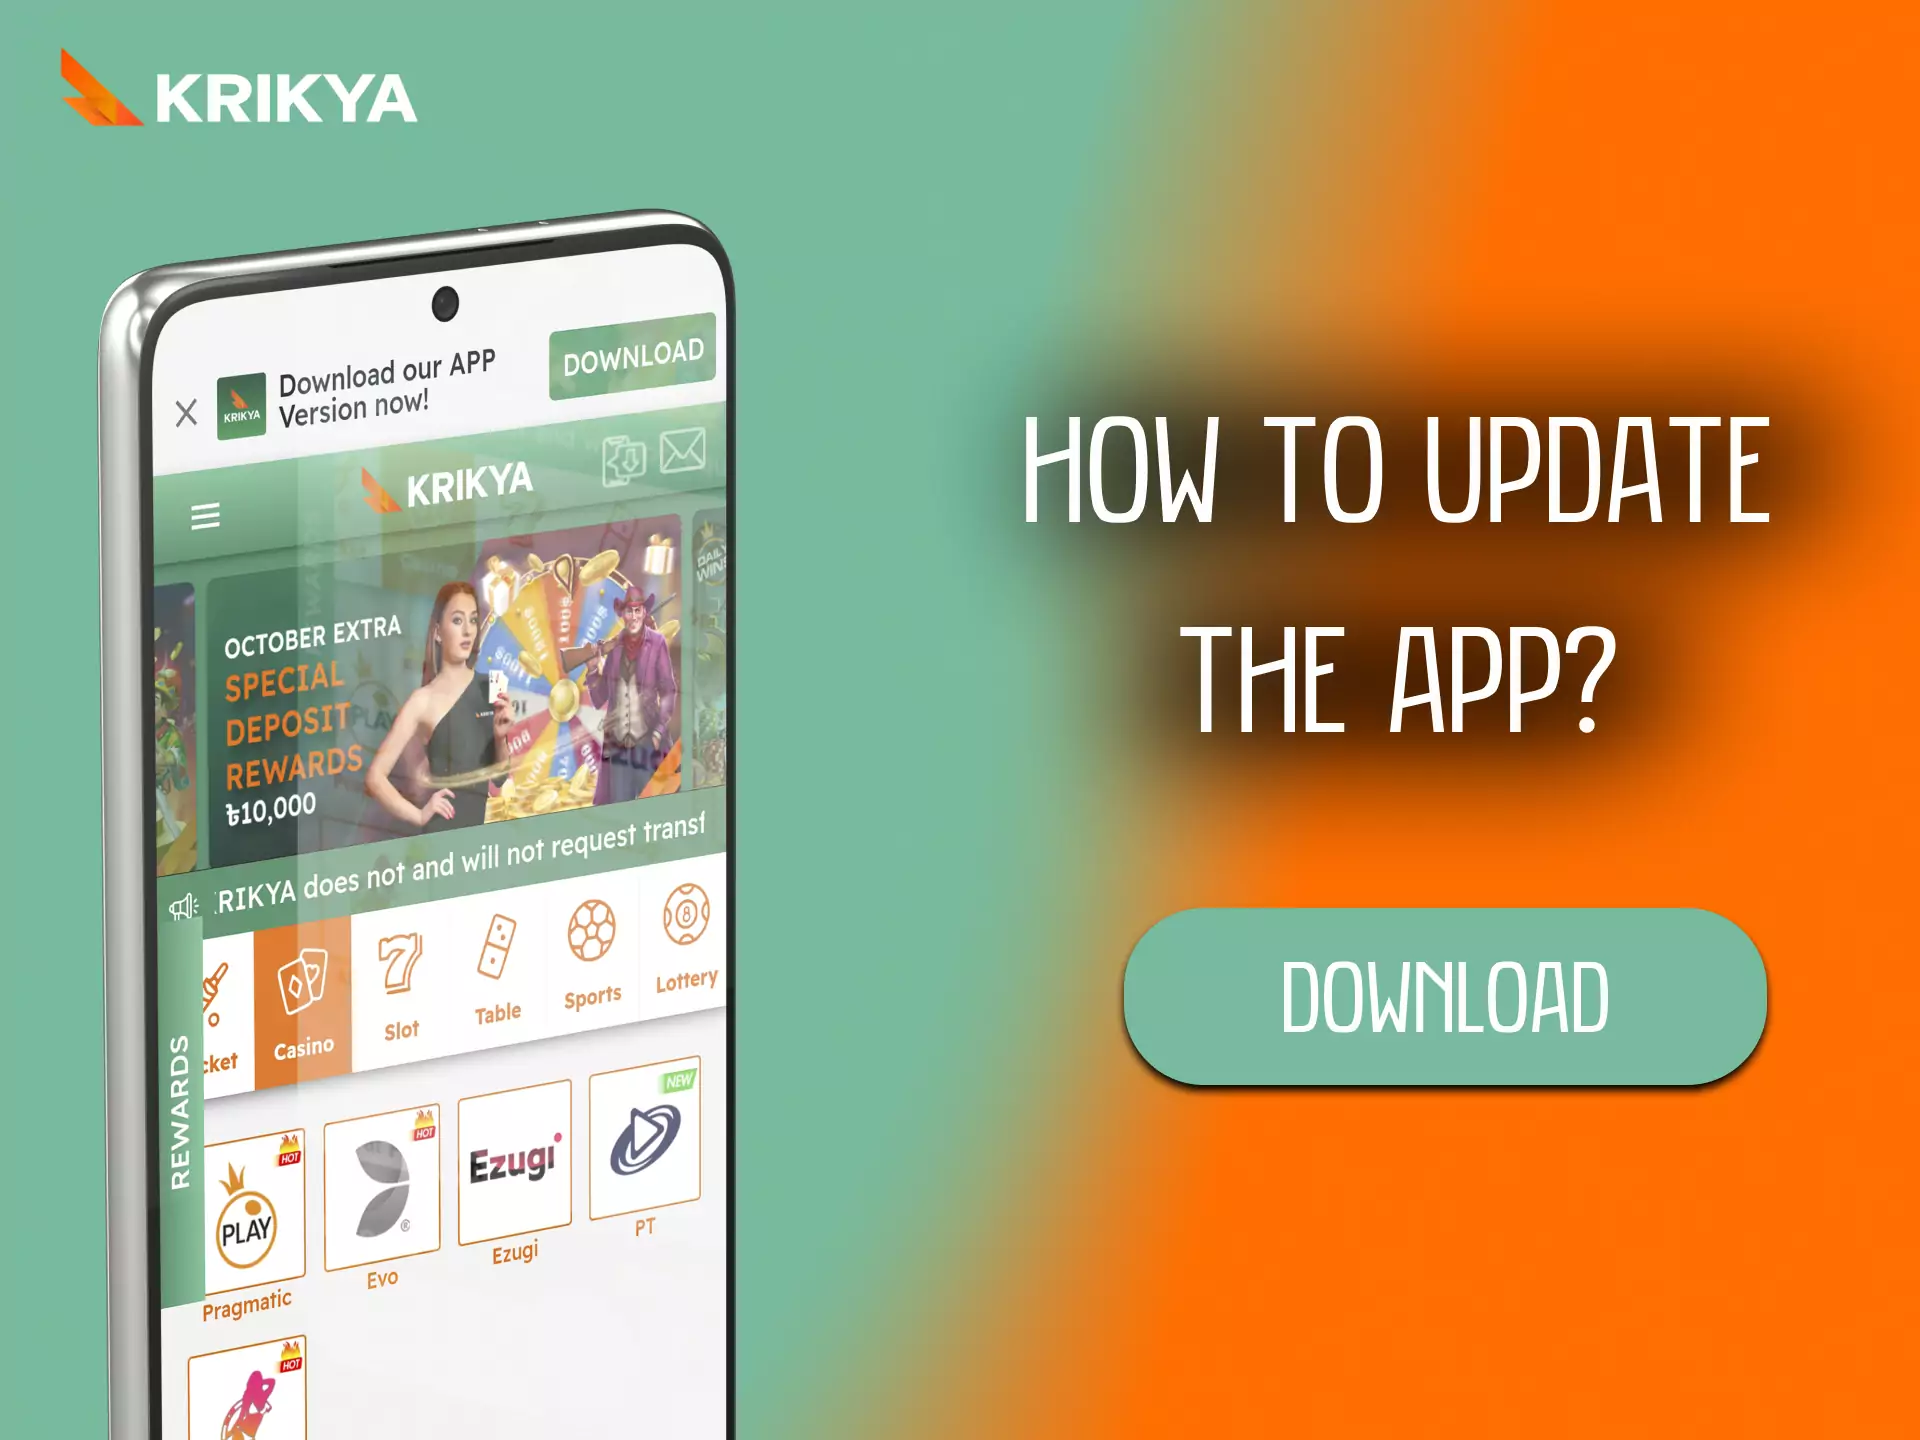 With the instructions, learn how to update the Krikya app.